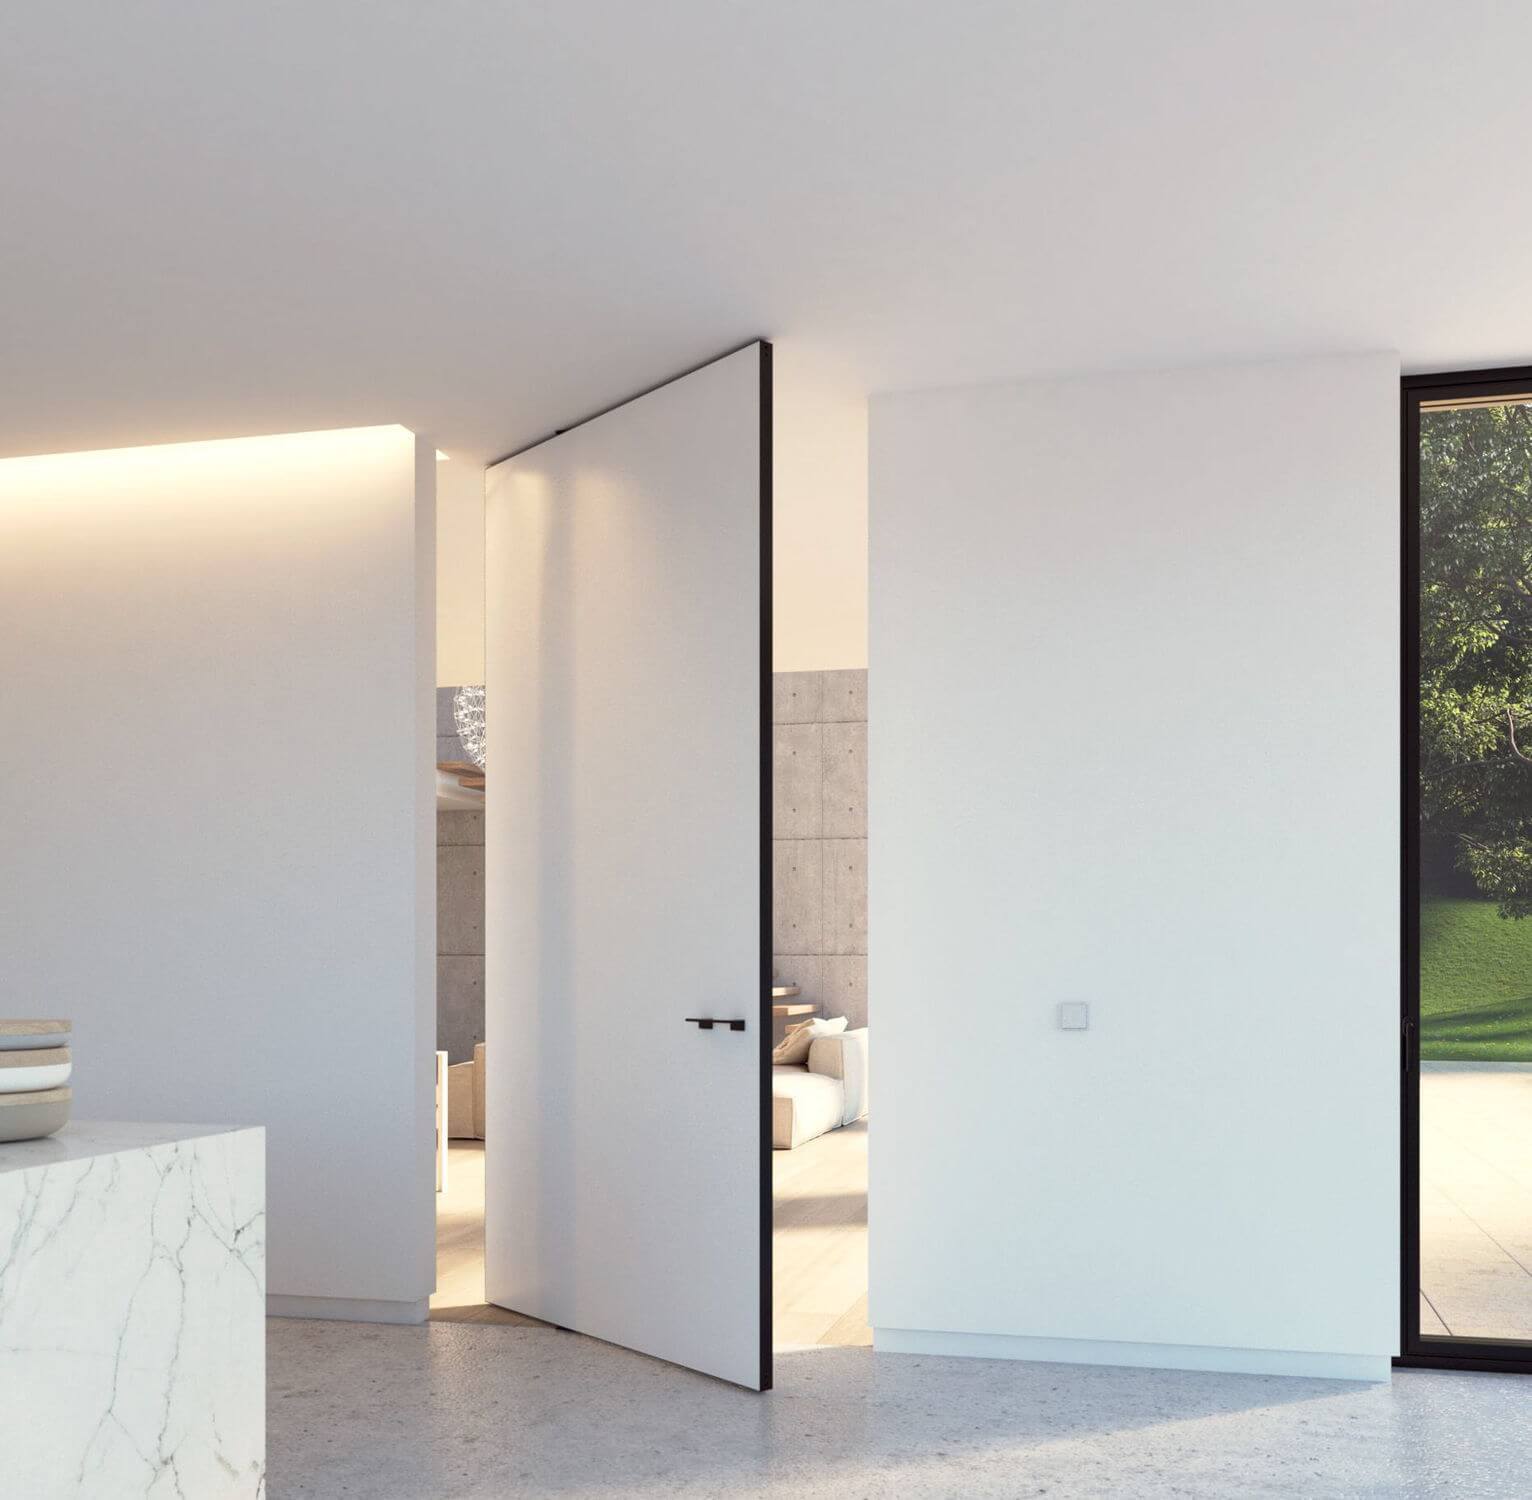 A white room with a marble counter top
and a pivot door